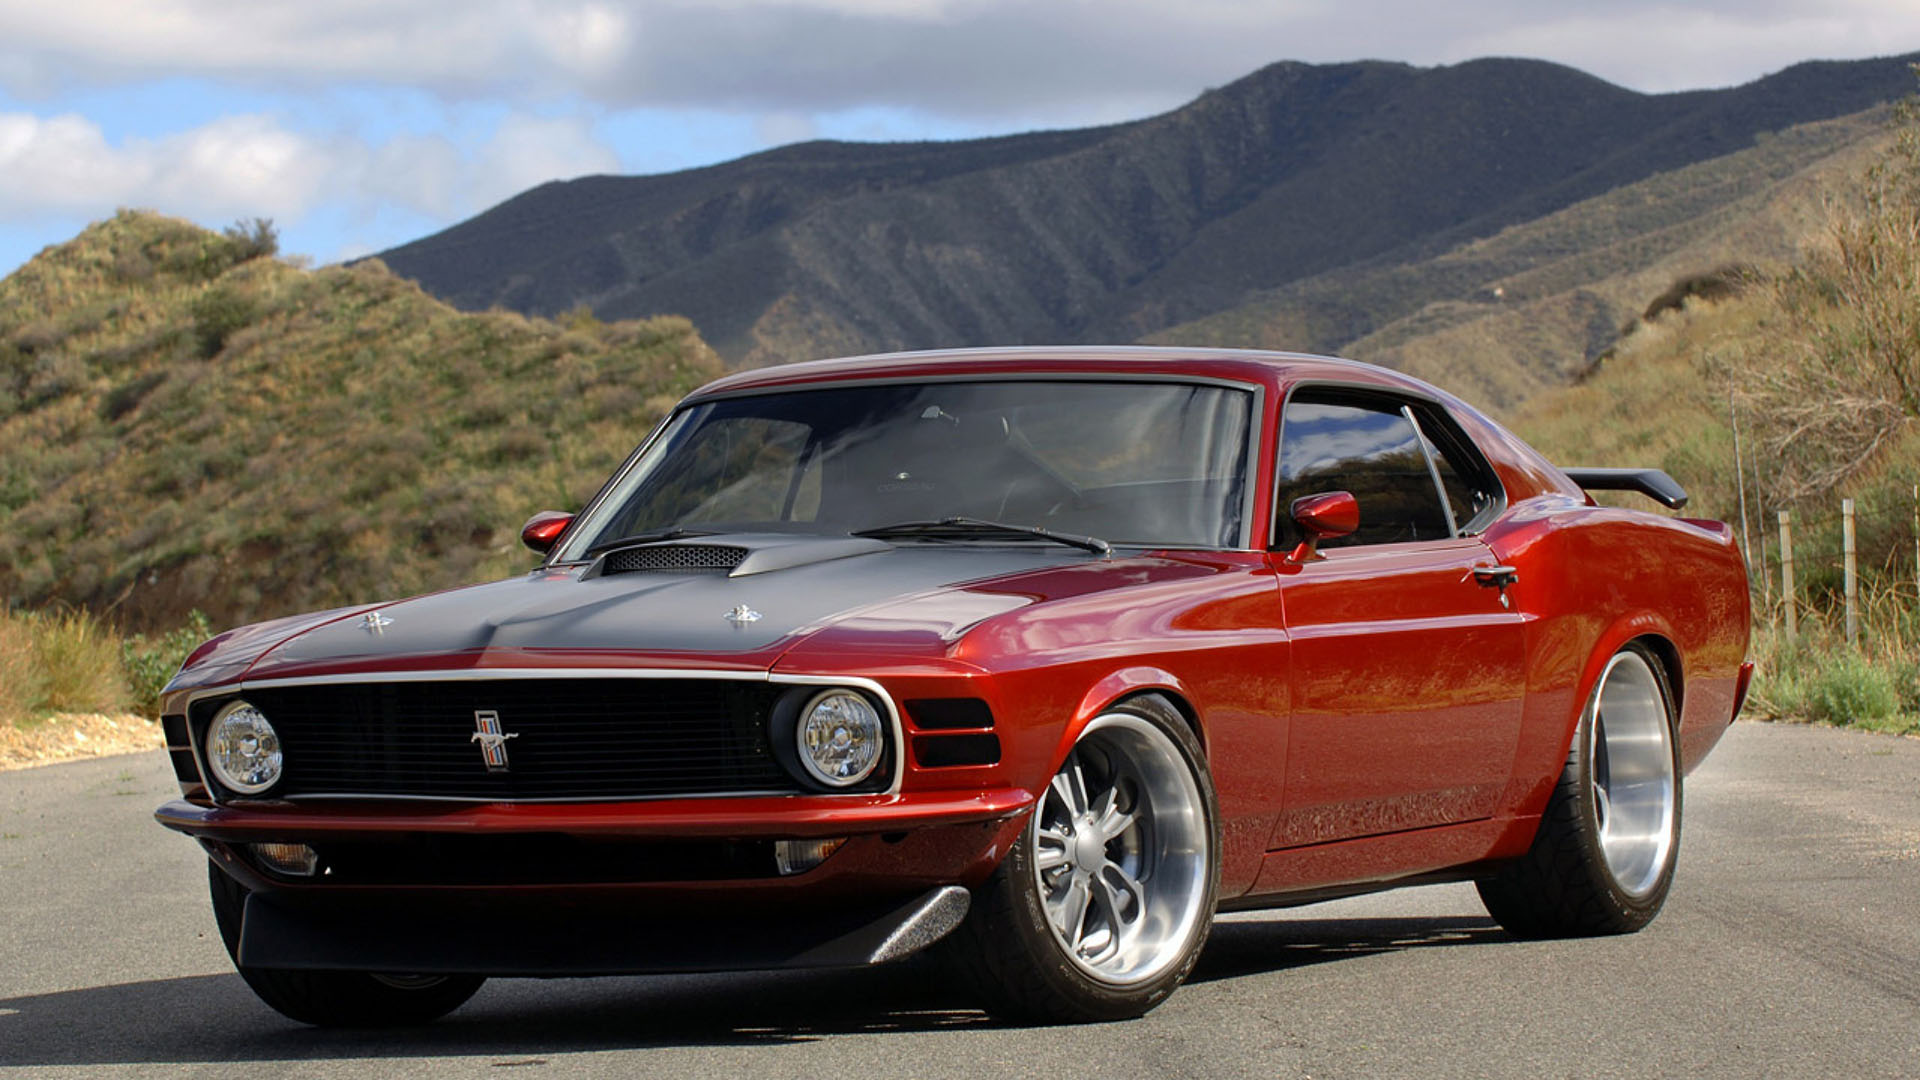 1970 FORD MUSTANG | Best New Cars 2015 | Release Date 2016 Reviews